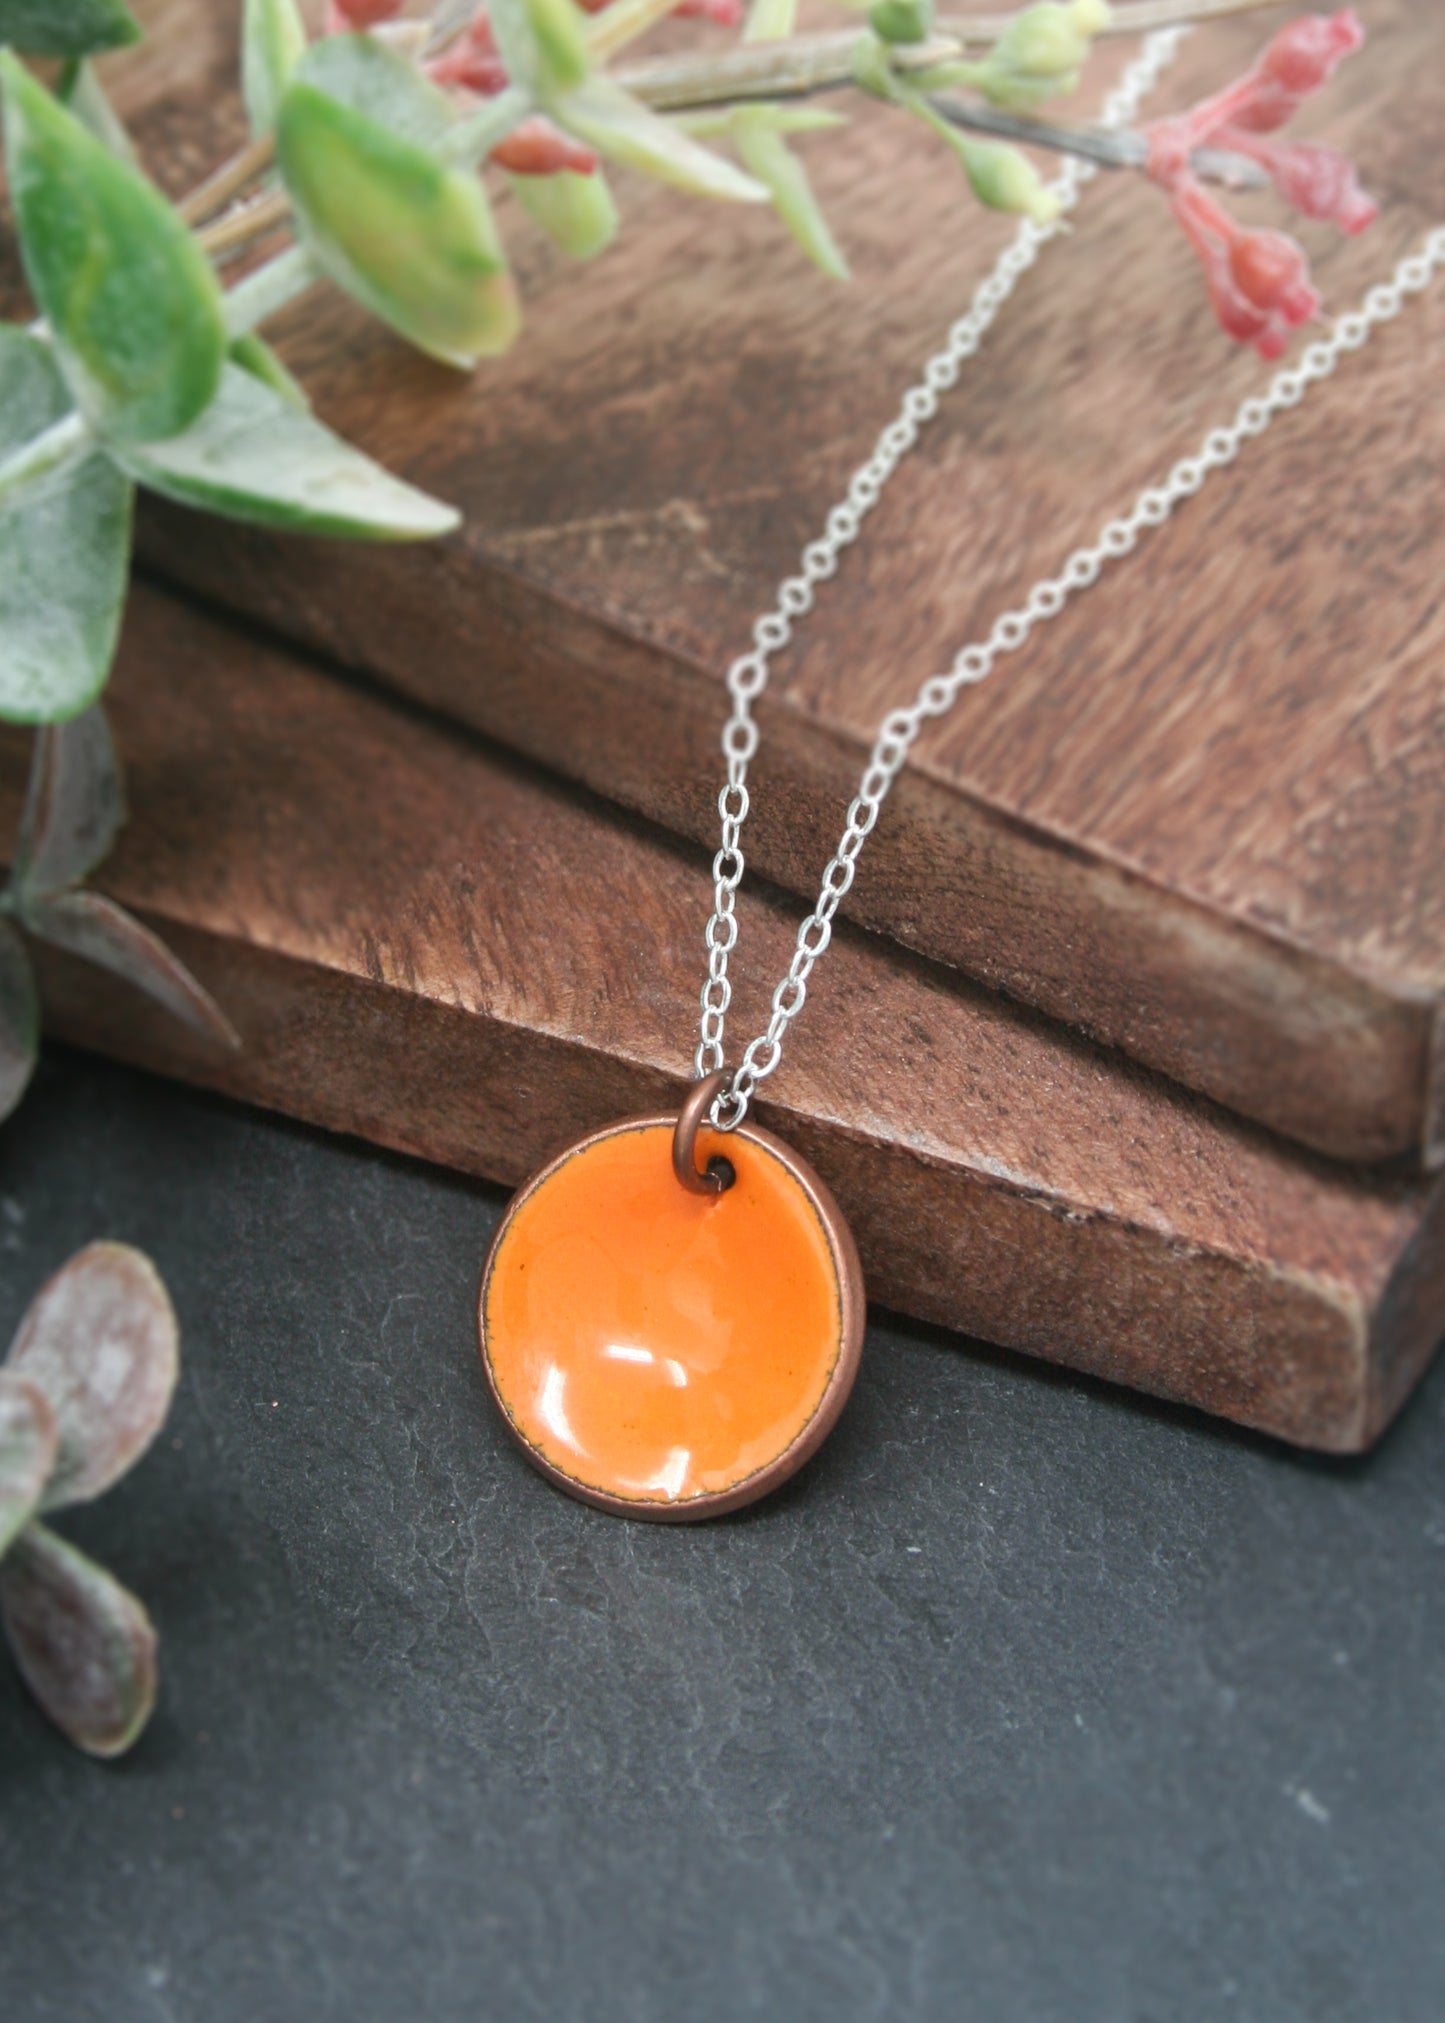 a necklace with an orange disc on it